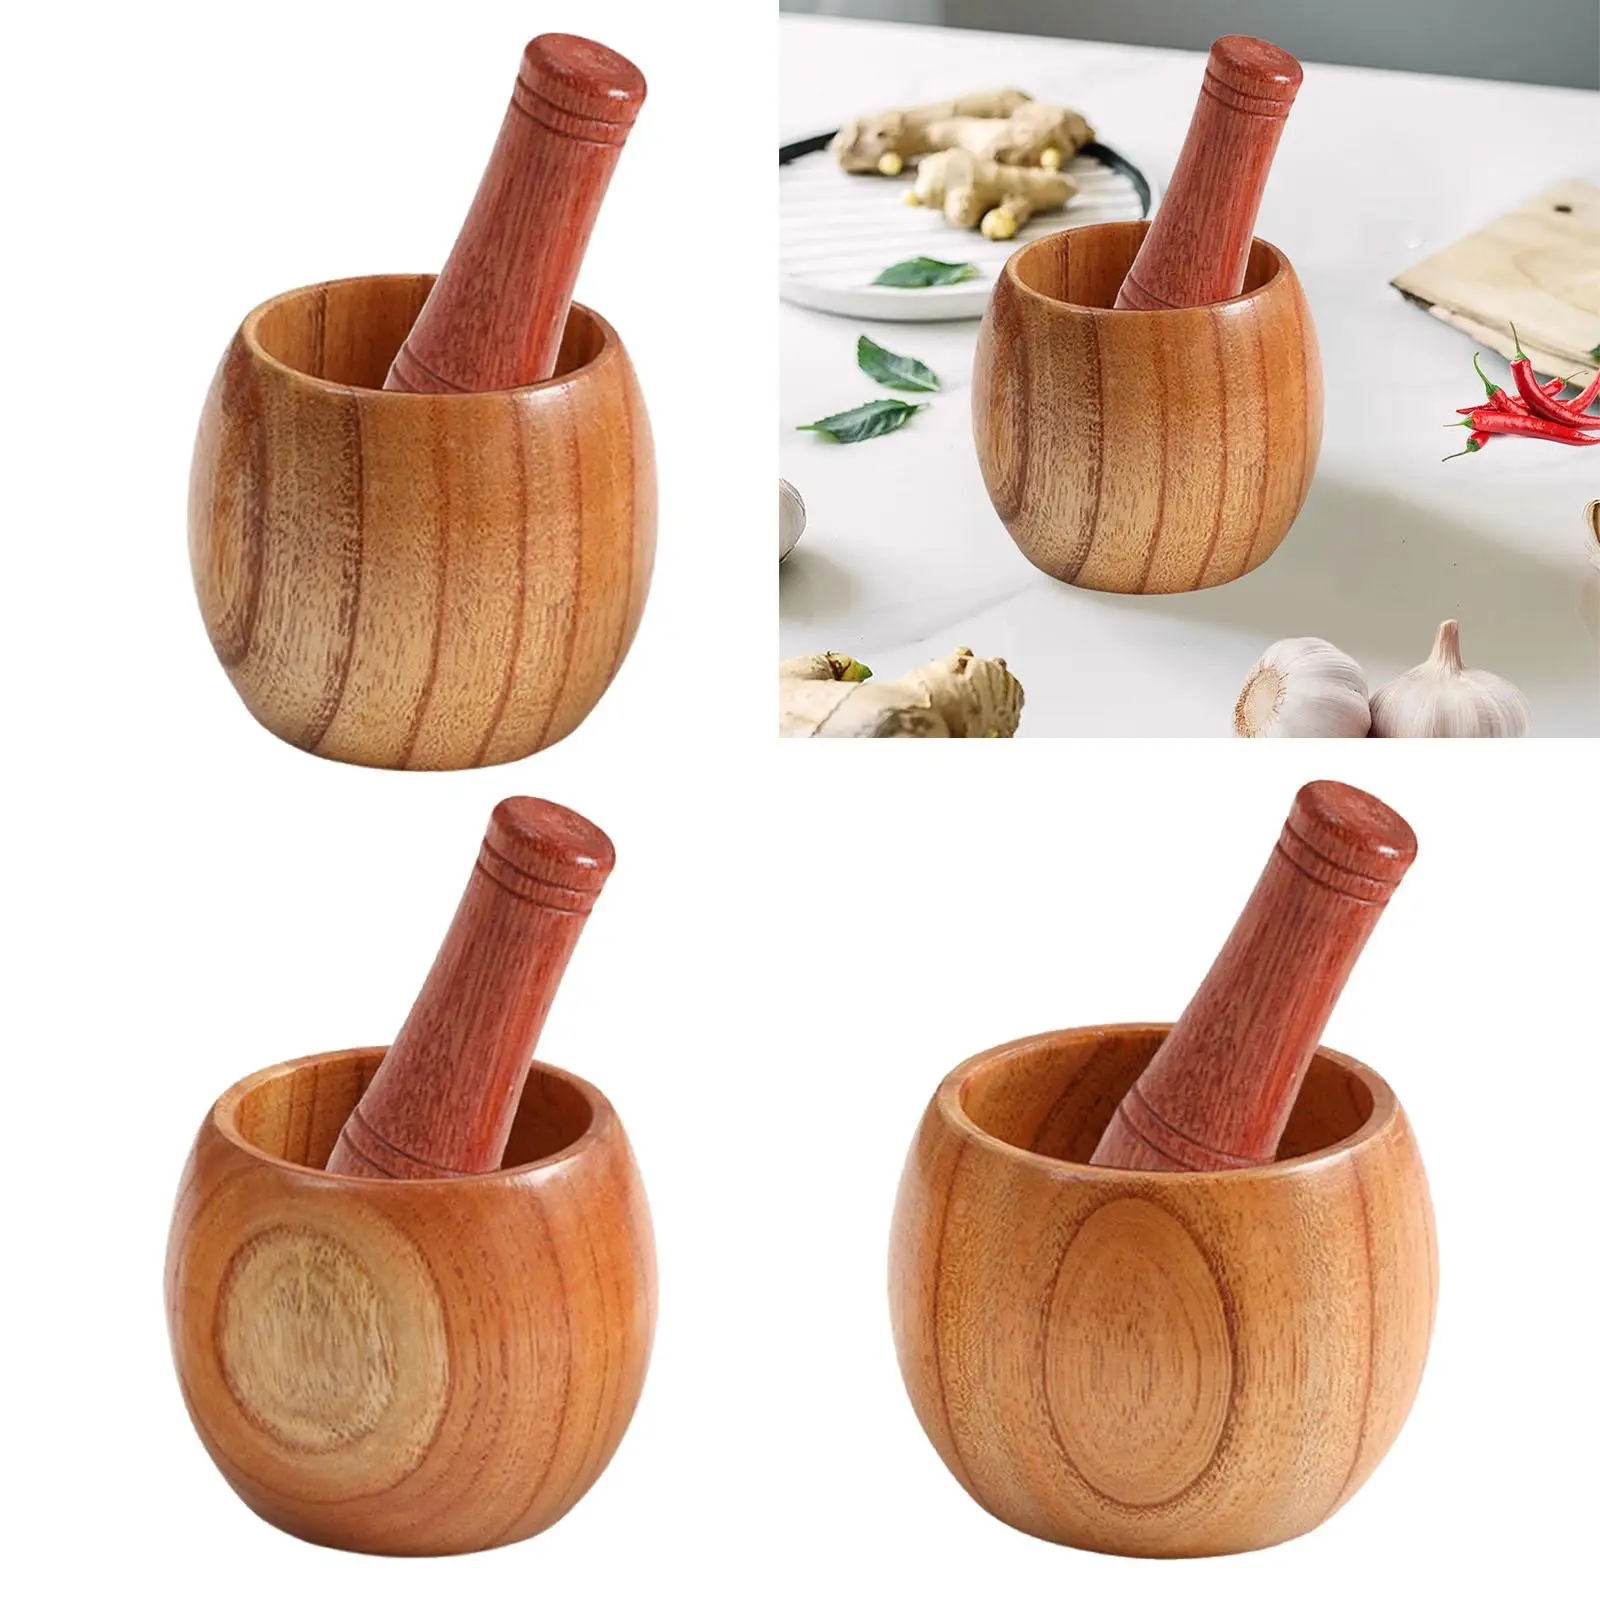 Mortar and Pestle Wooden Garlic Masher Hand Grinder Crusher Kitchen Gadgets Mixing Tool for Spice & Seasonings